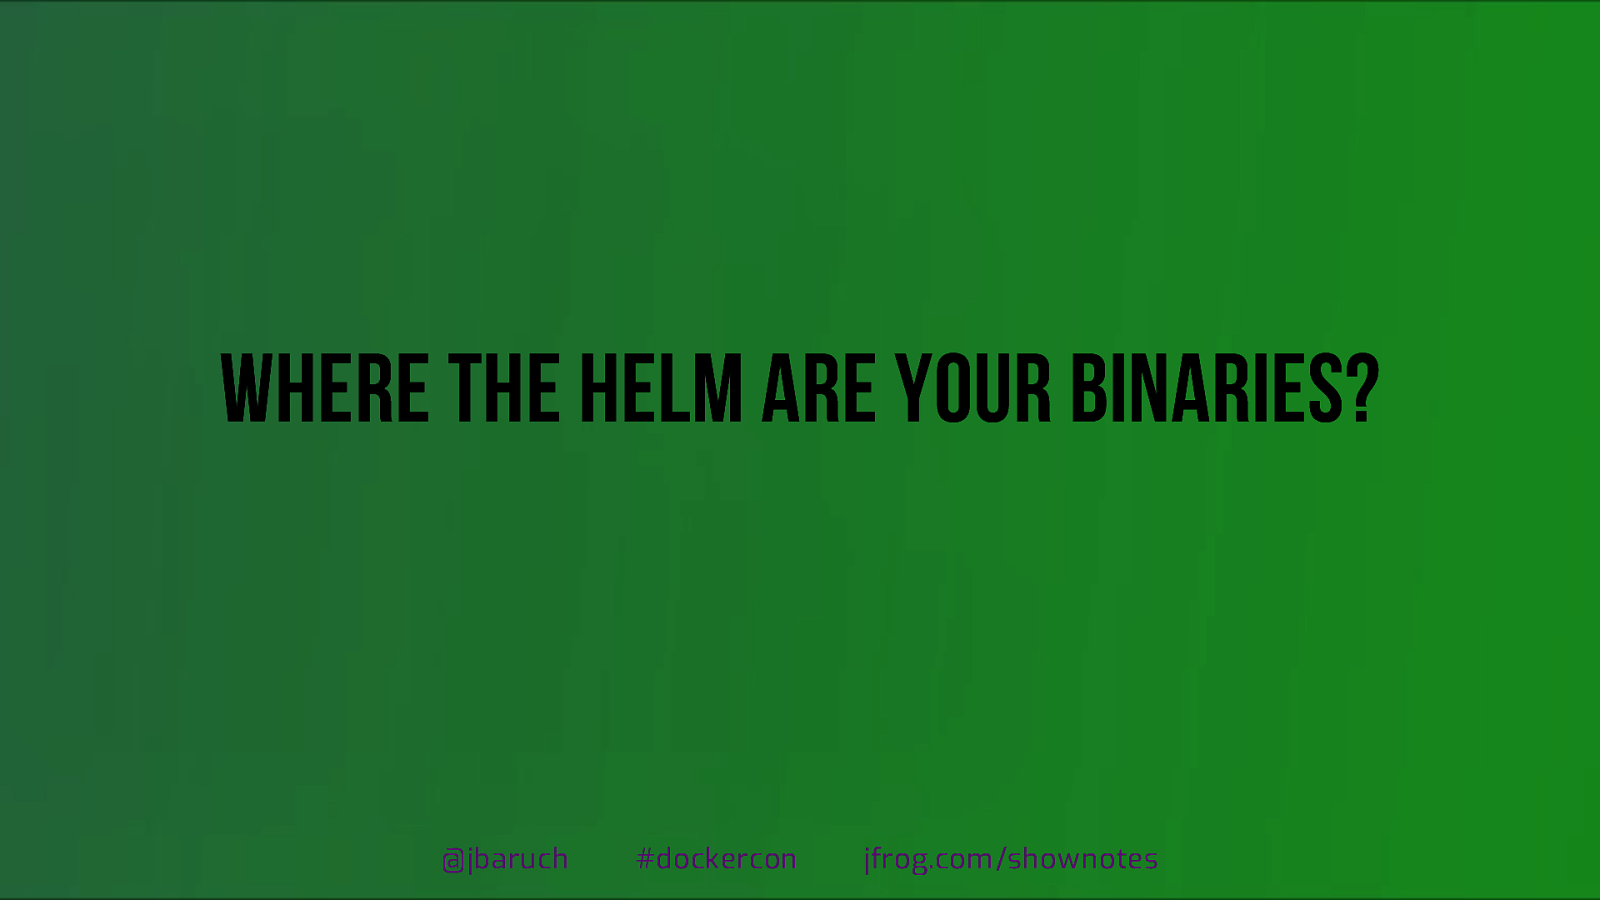 Where the Helm are your binaries?